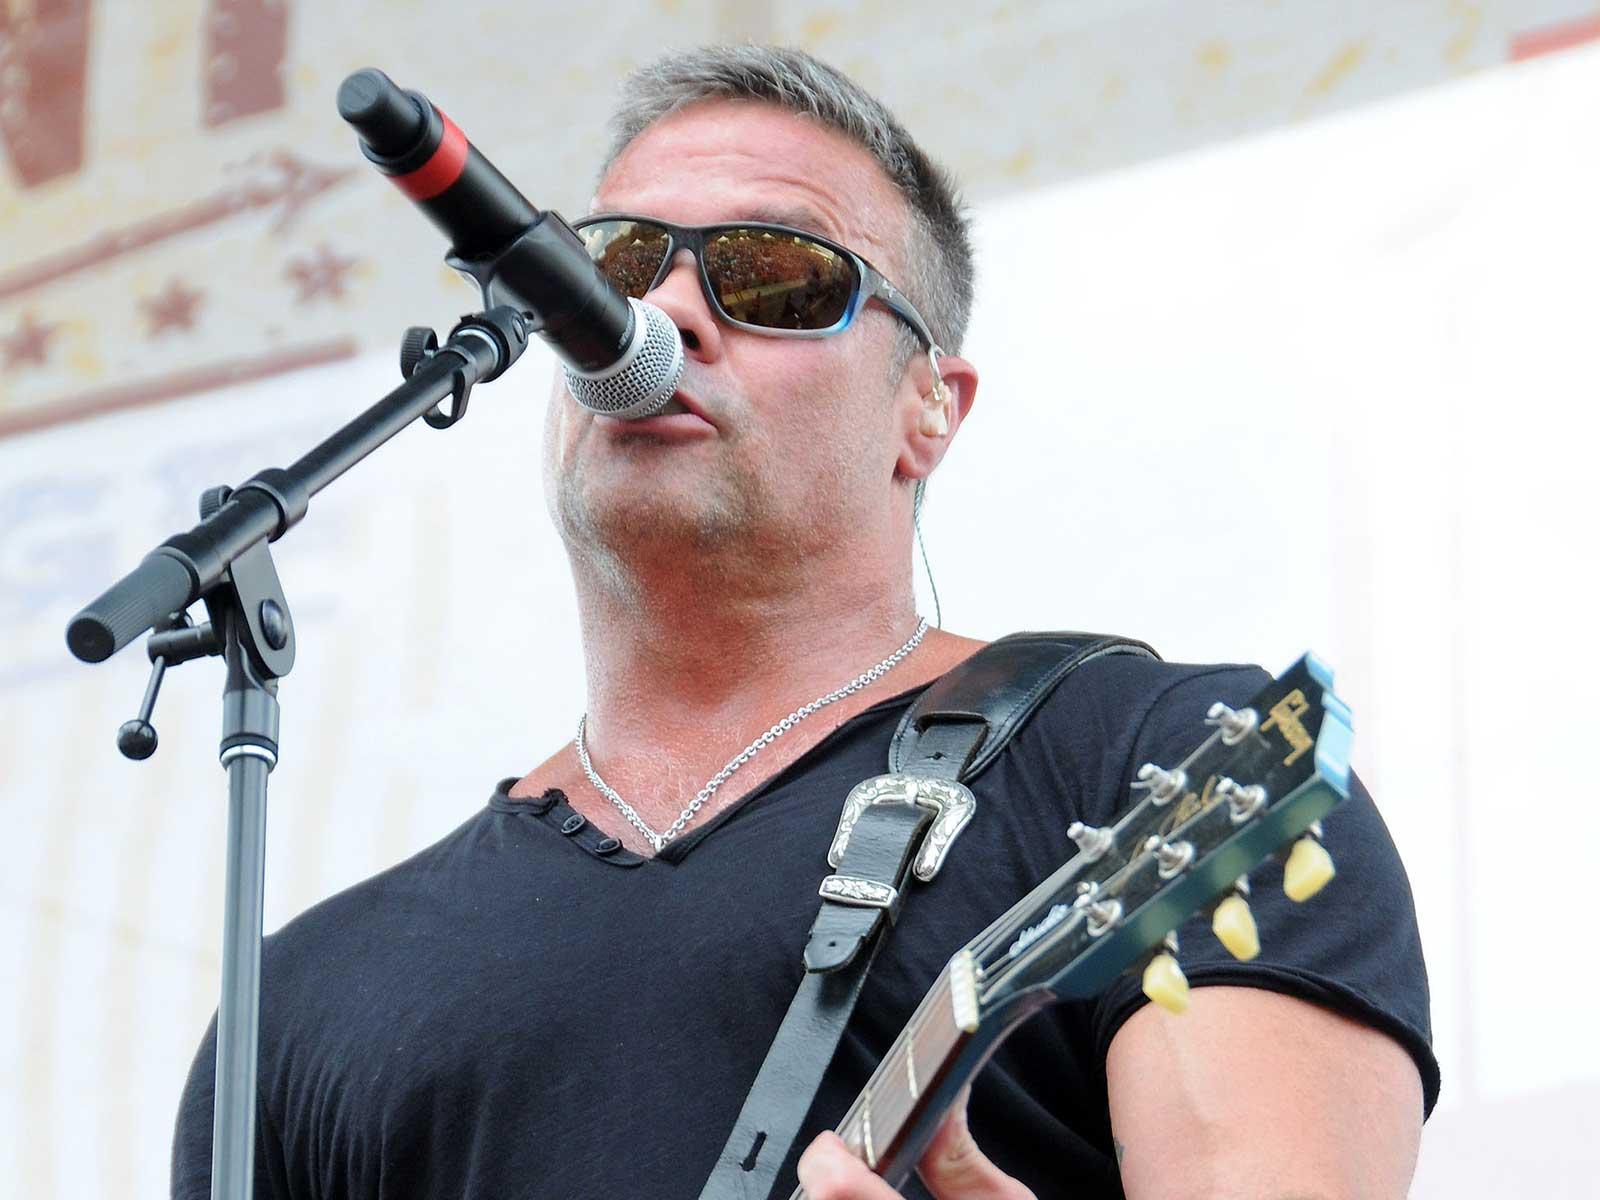 Troy Gentry Deadly Crash: Chopper Hovered Several Minutes Waiting for Help (Audio)